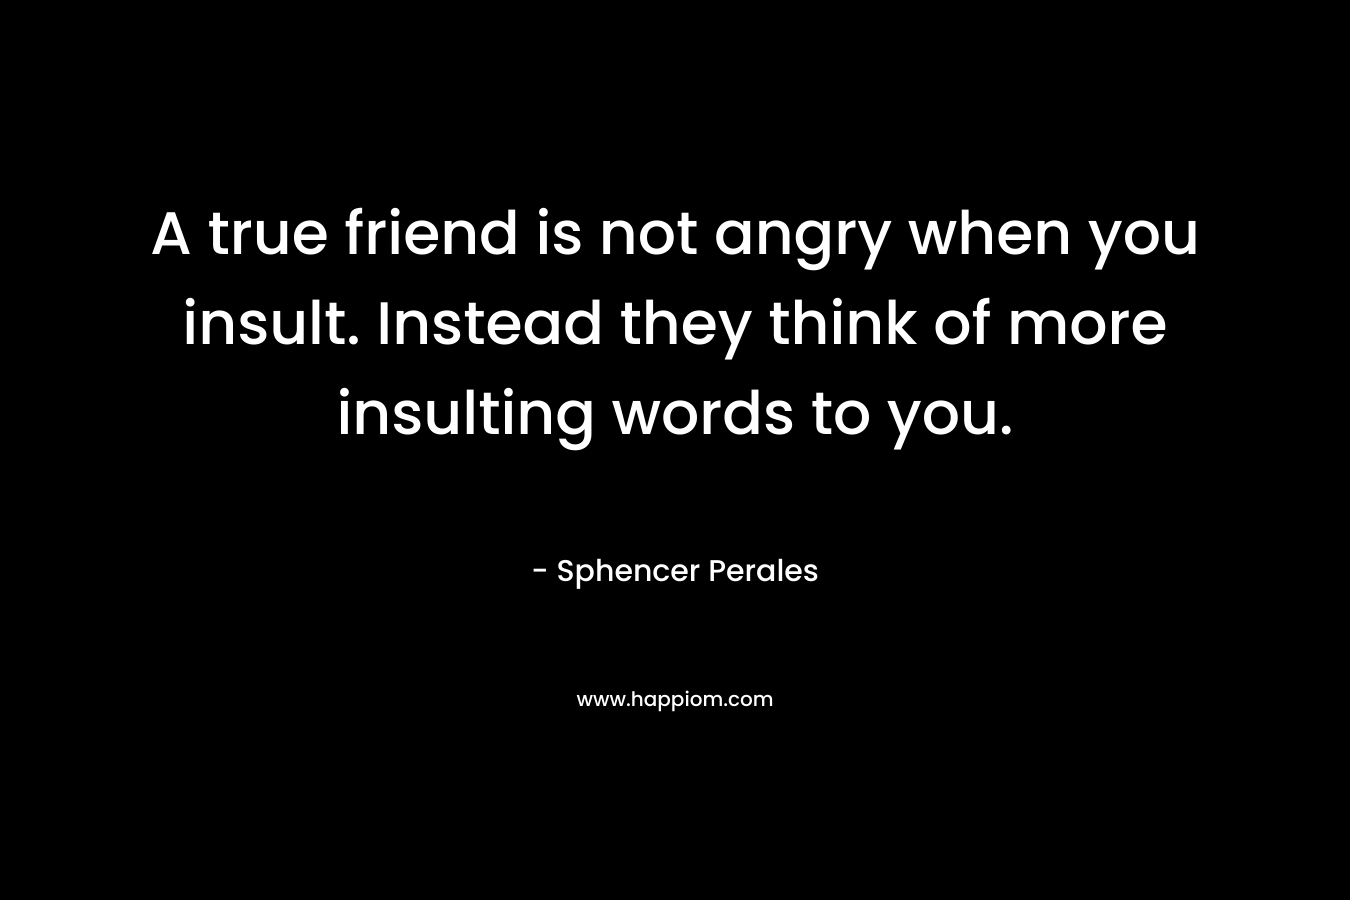 A true friend is not angry when you insult. Instead they think of more insulting words to you.